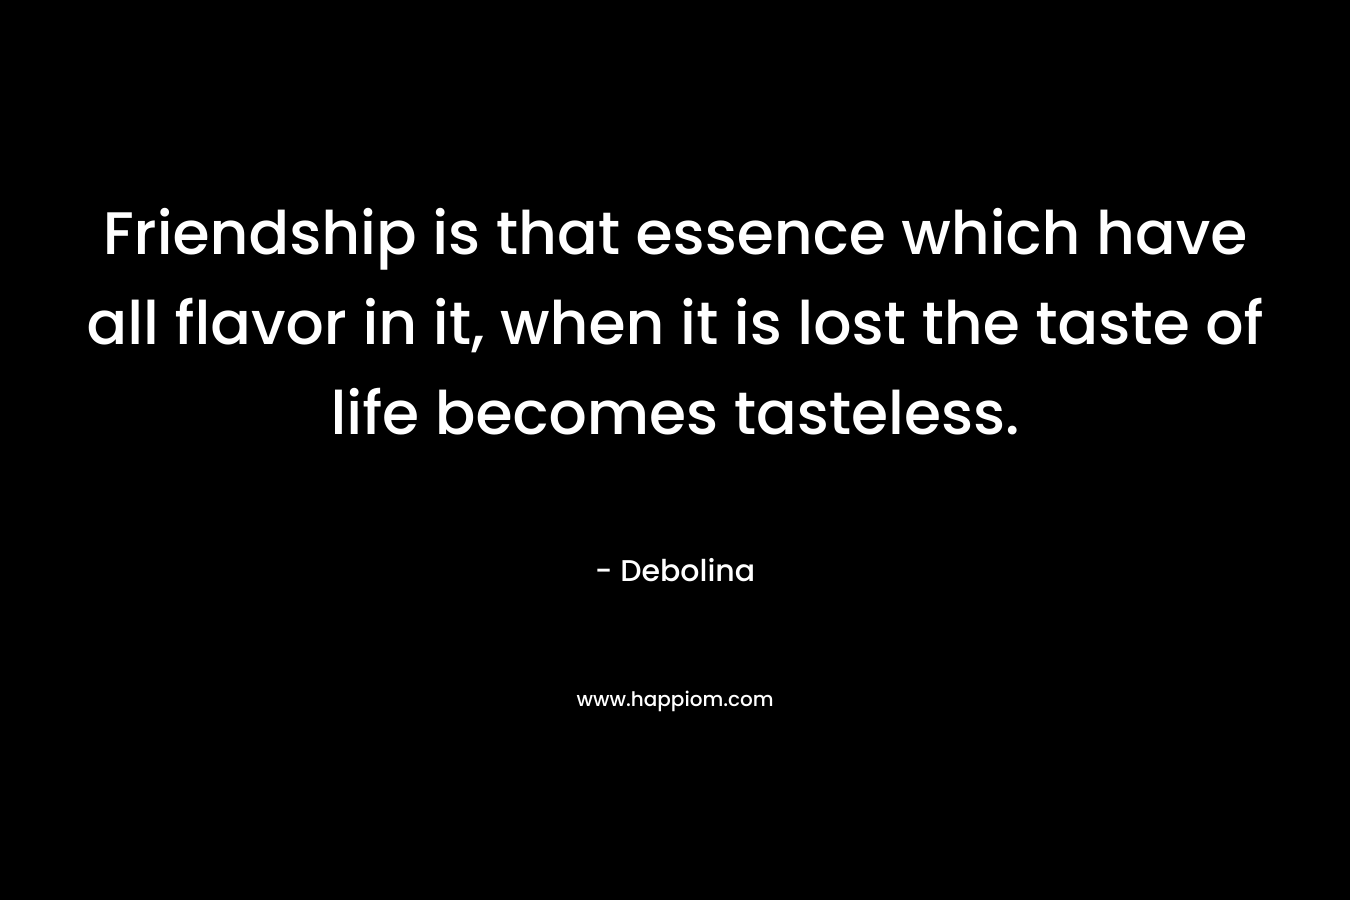 Friendship is that essence which have all flavor in it, when it is lost the taste of life becomes tasteless. – Debolina